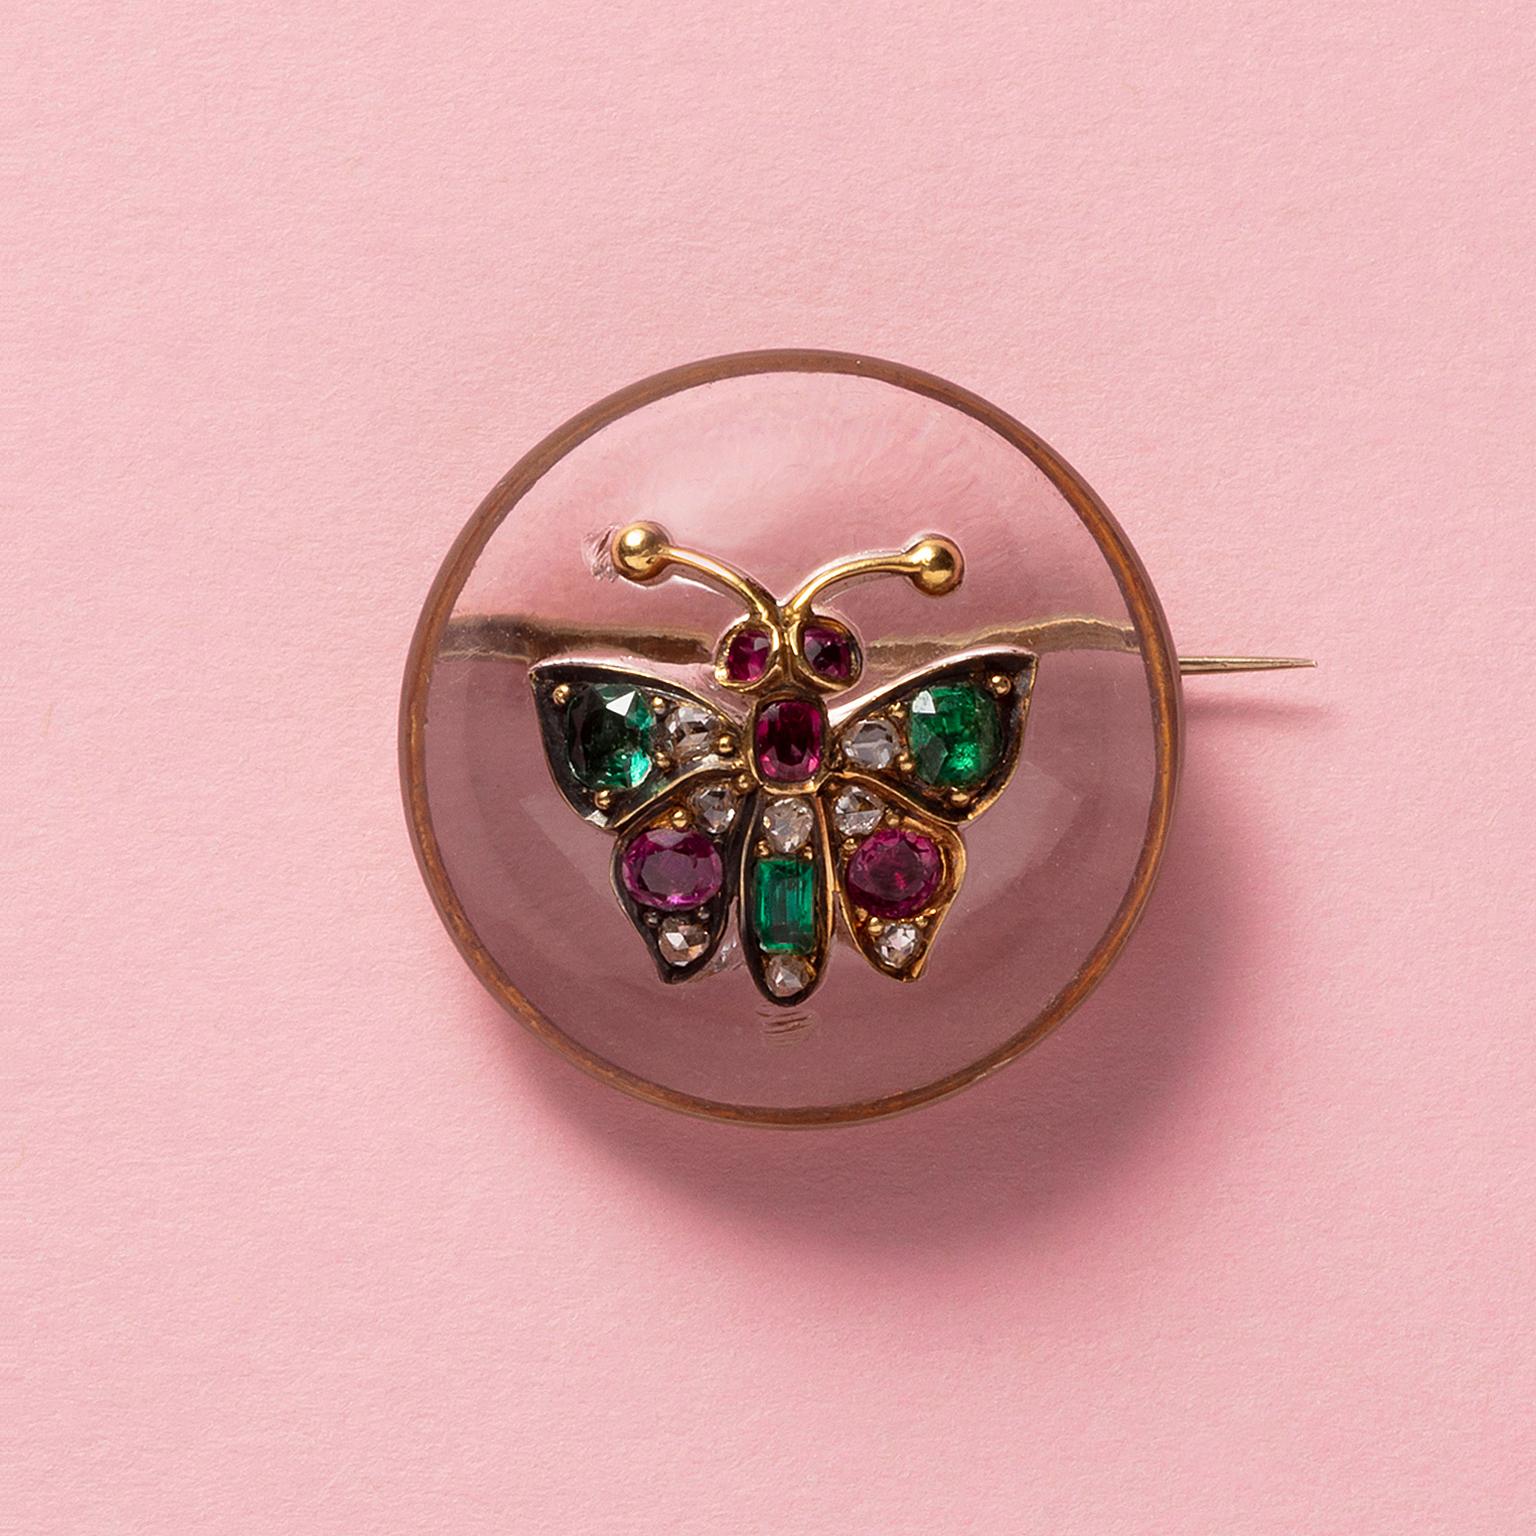 A 14 carat gold butterfly brooch with a large, round cabochon cut rock crystal set with a gold butterfly set with old cut emeralds, rubies and diamonds, the pin is 9 carat gold, circa 1880.

weight: 13.20 grams
diameter: 27 mm